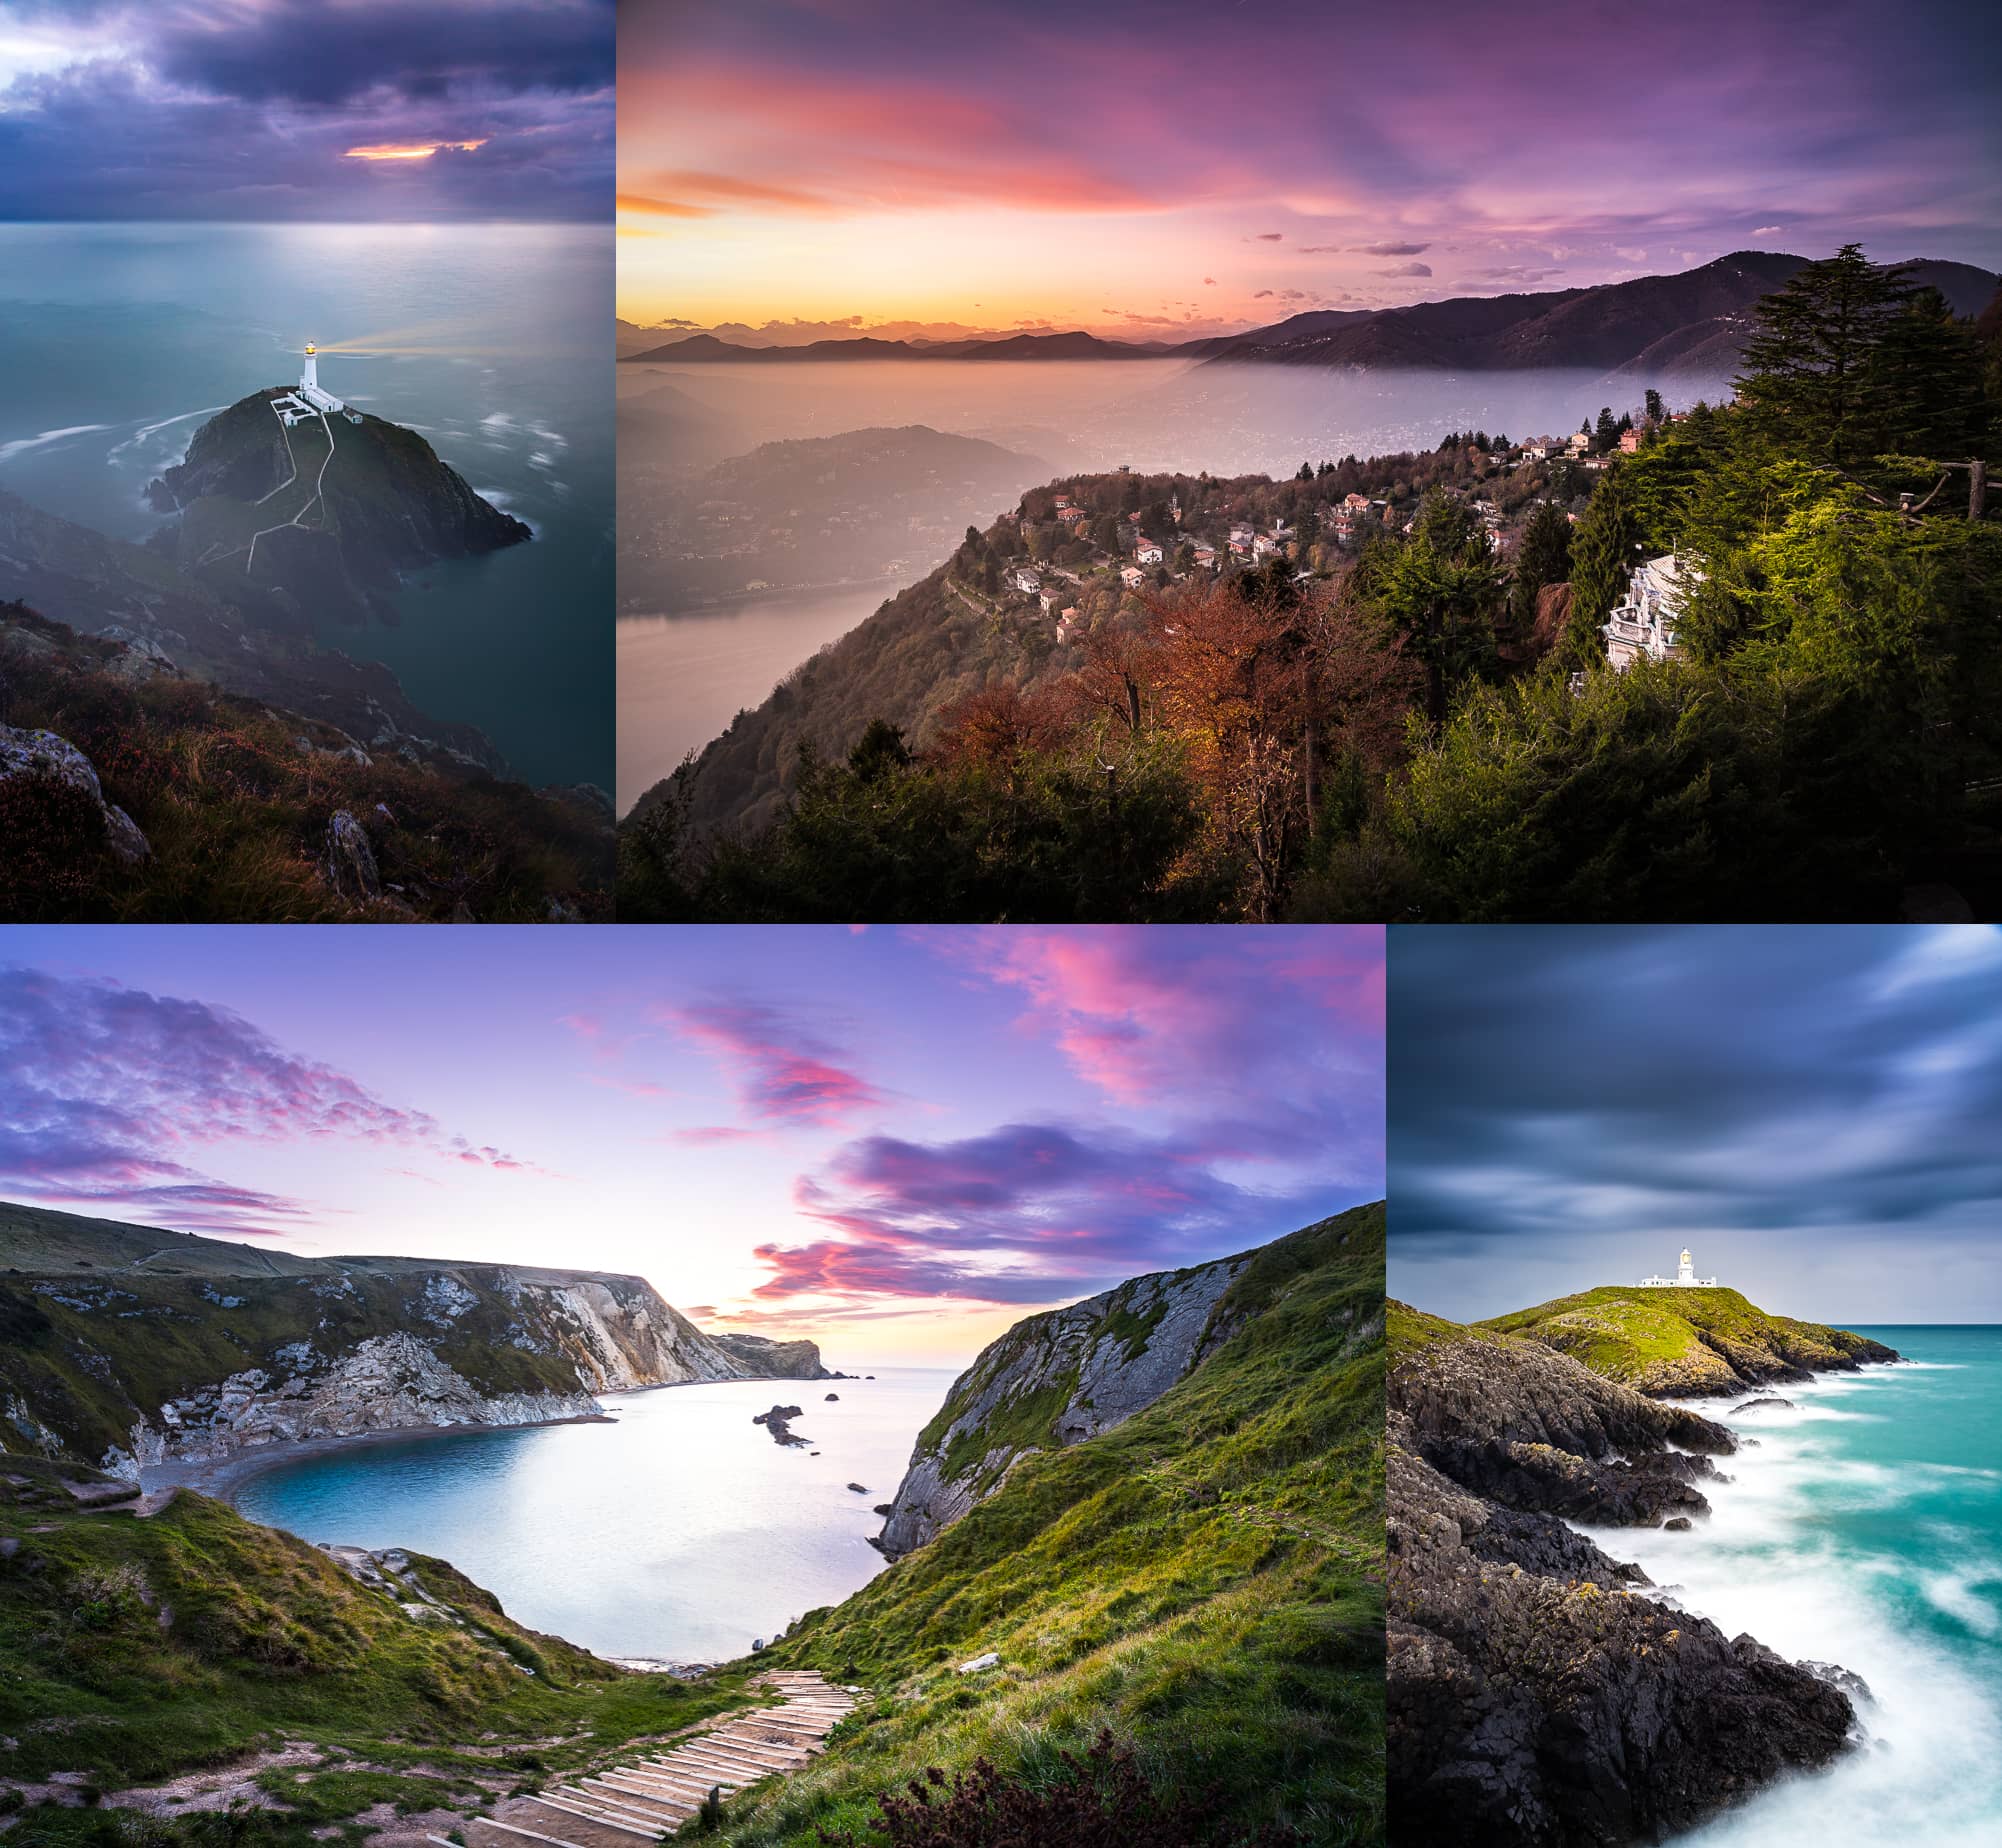 South Stack Lighthouse in Wales, Brunate Italy, Lulworth Cove in England, and Strumble Head Lighthouse in Wales